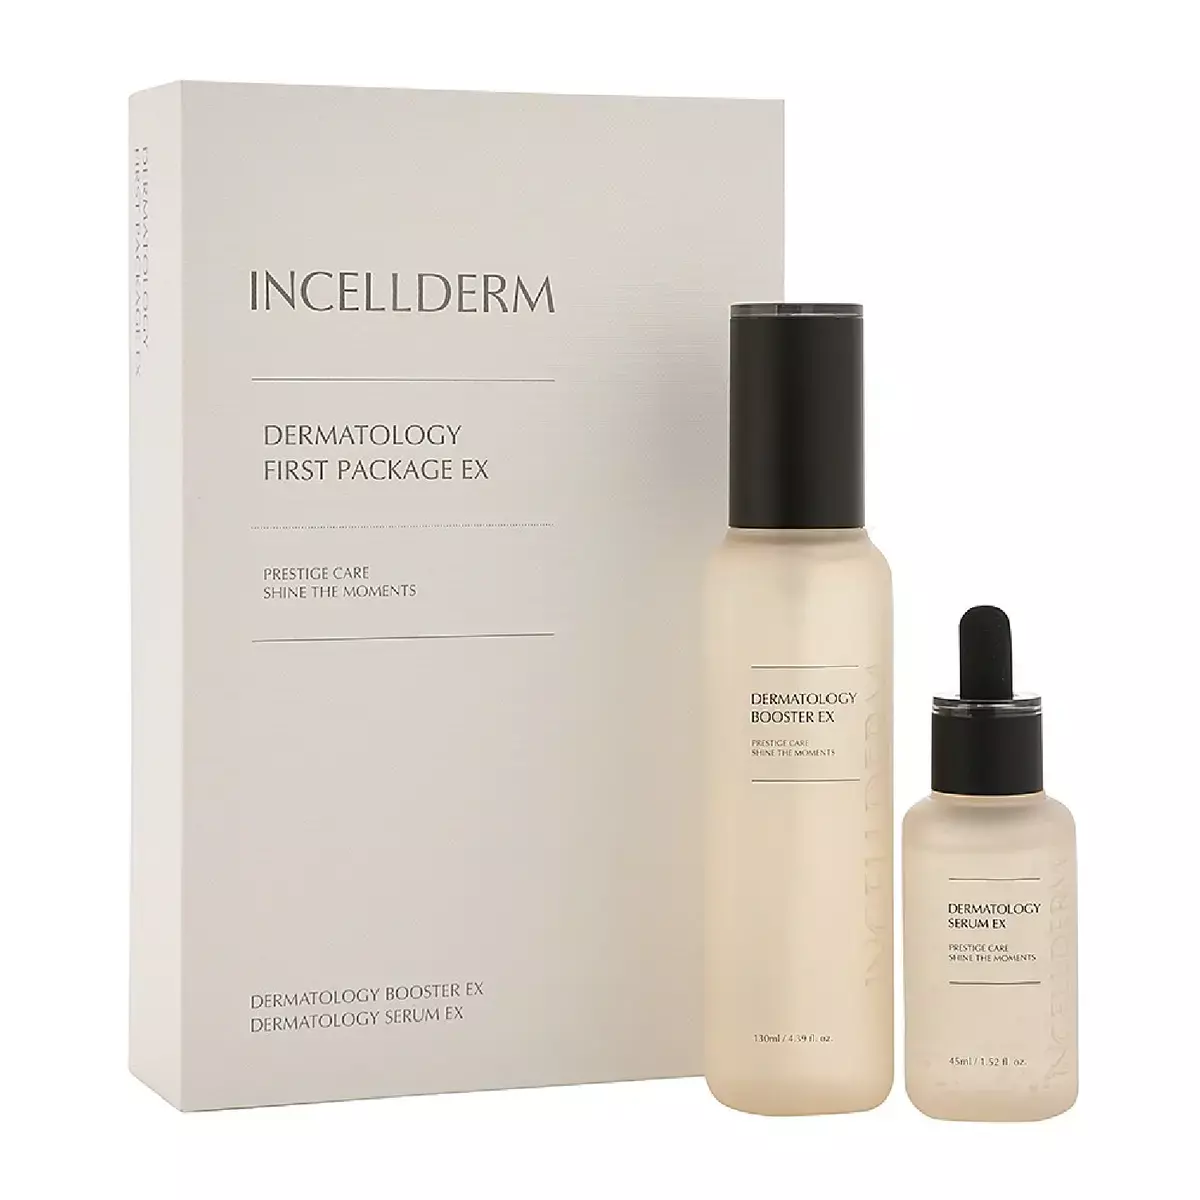 DERMATOLOGY FIRST PACKAGE